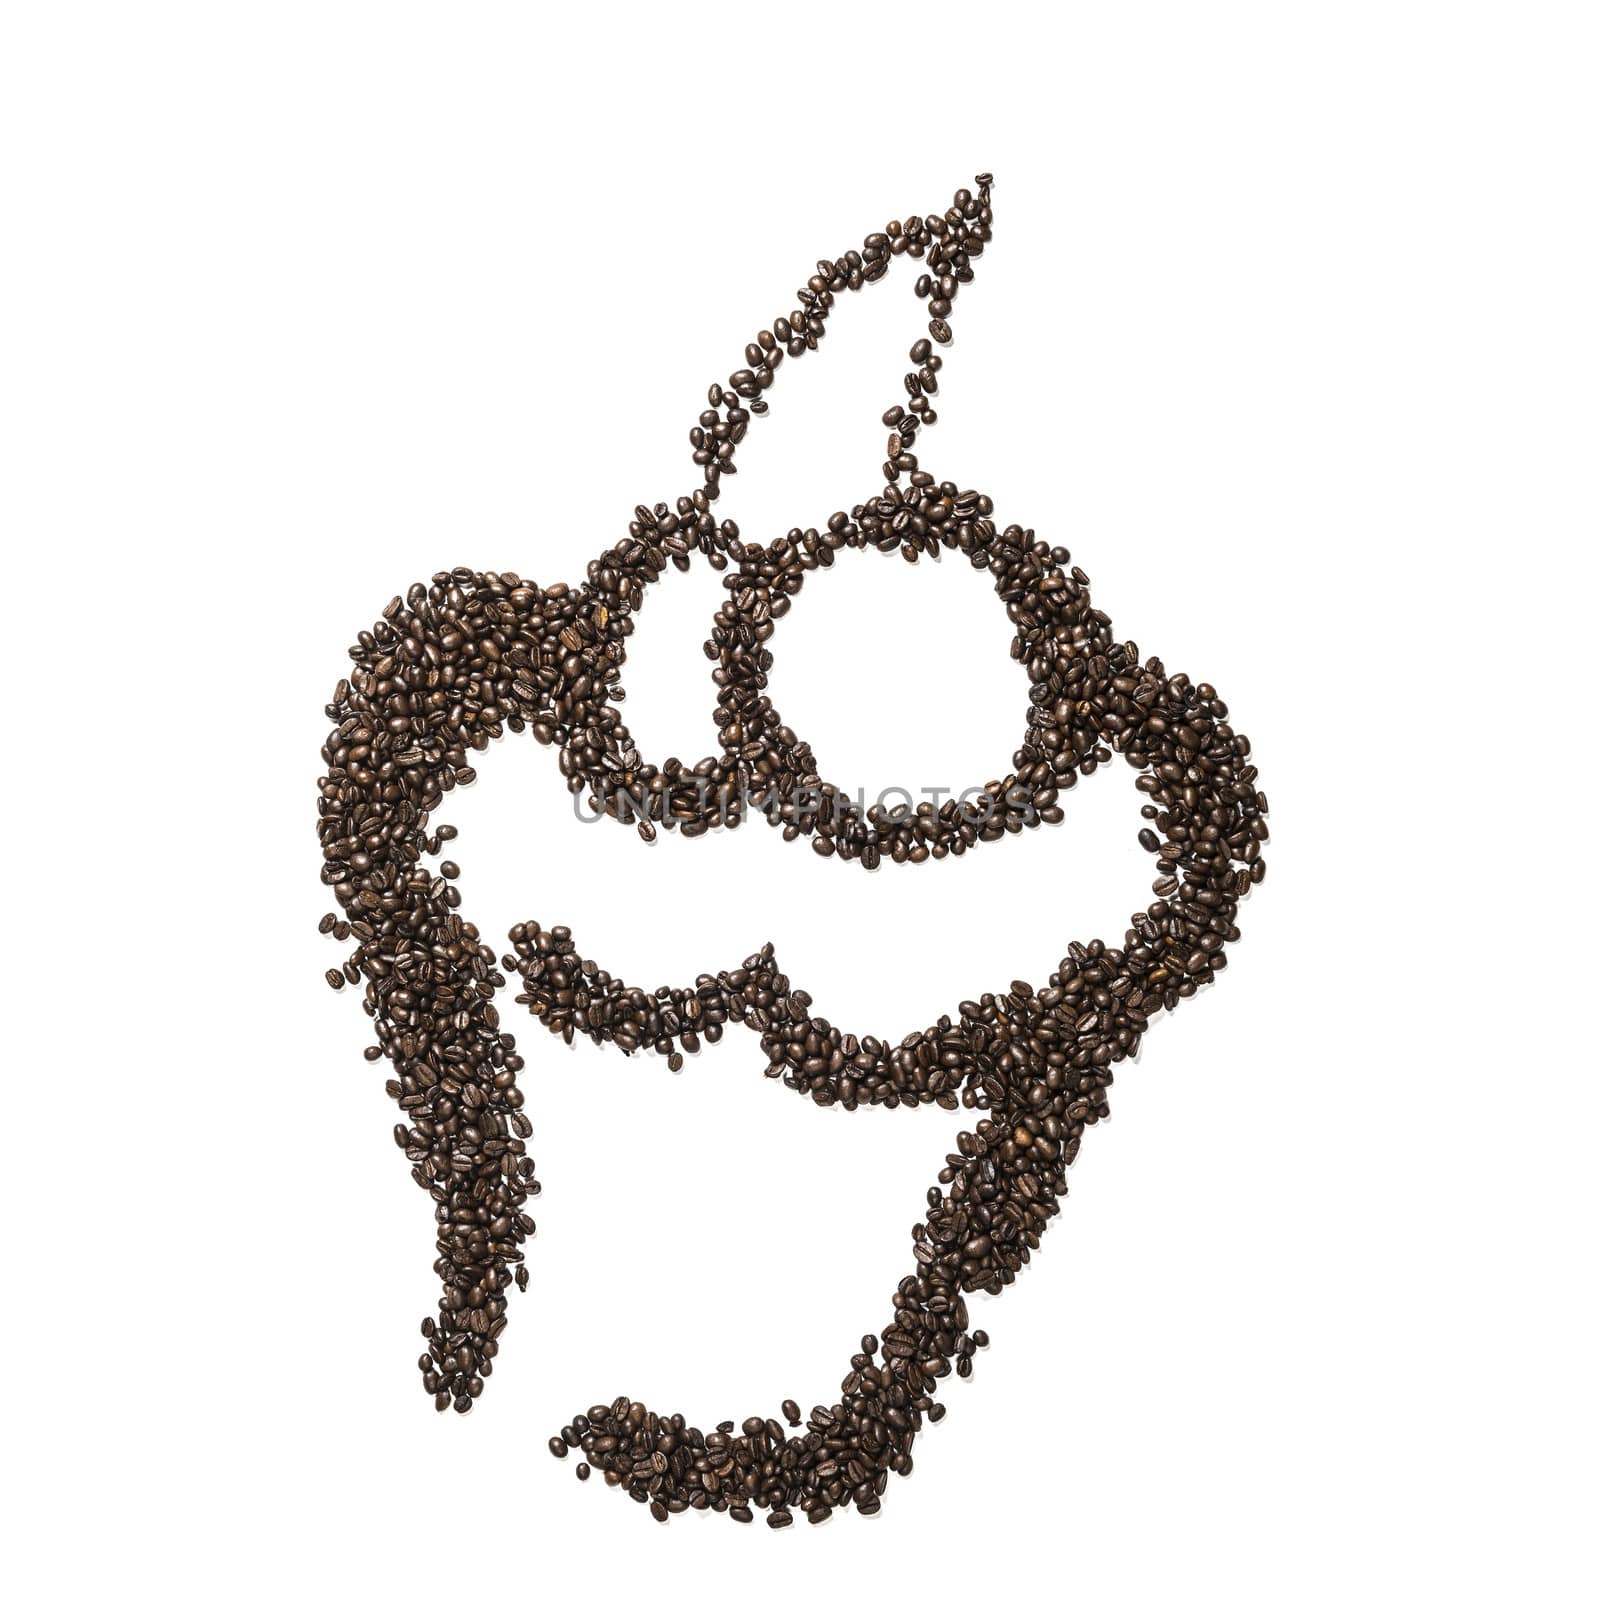 Image of a muffin made from coffee beans isolated on white background